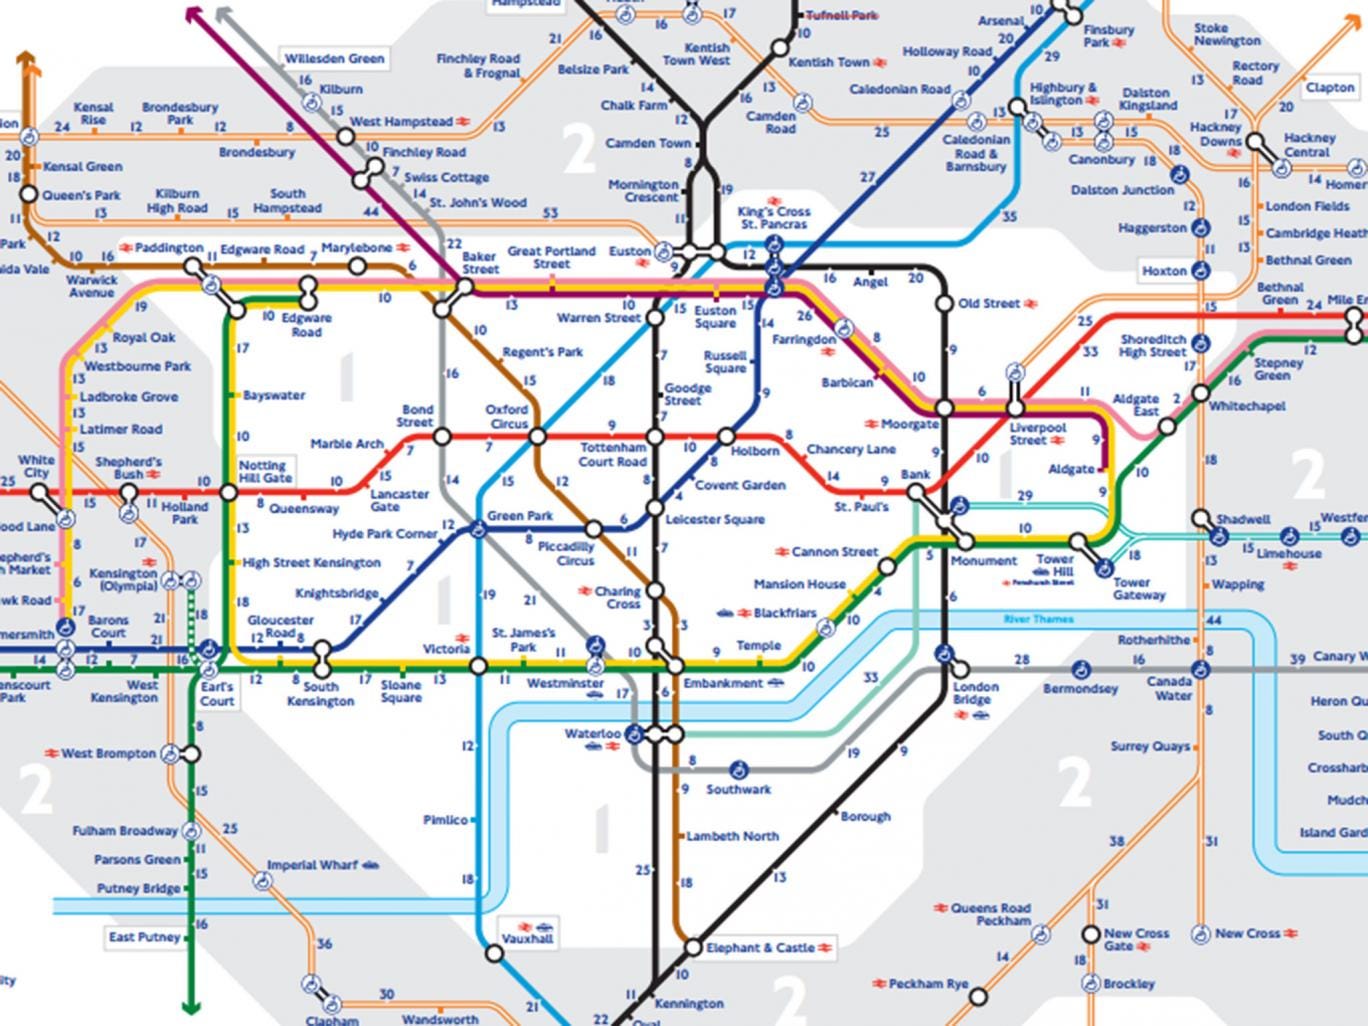 TfL releases first official 'walk the Tube' map for London Home News